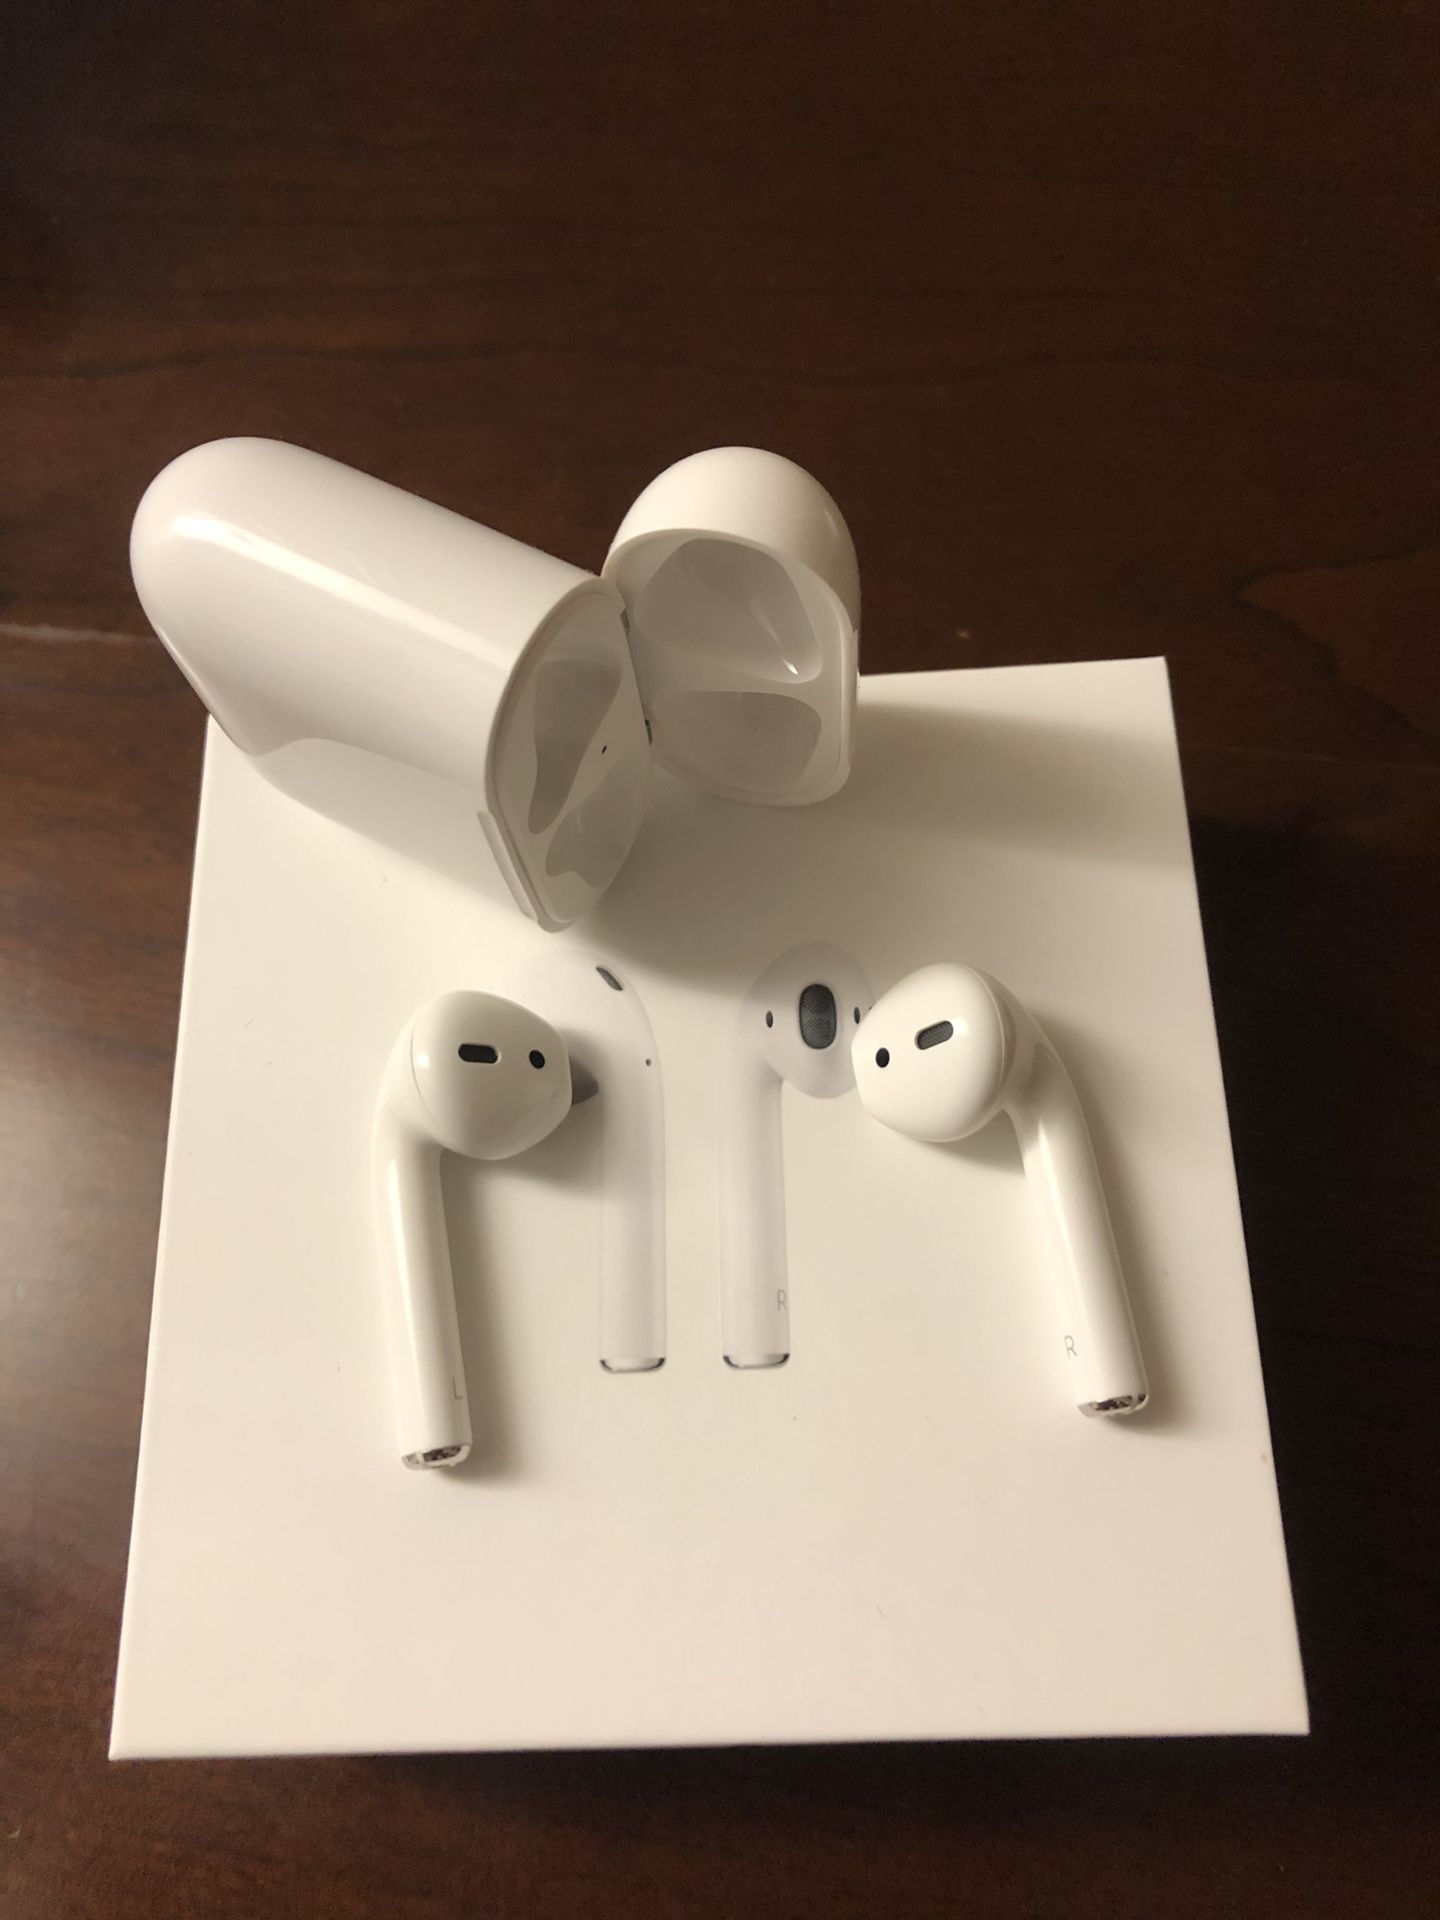 Apple AirPods 2 with fit-in-case Covers and Charger - 2 month old